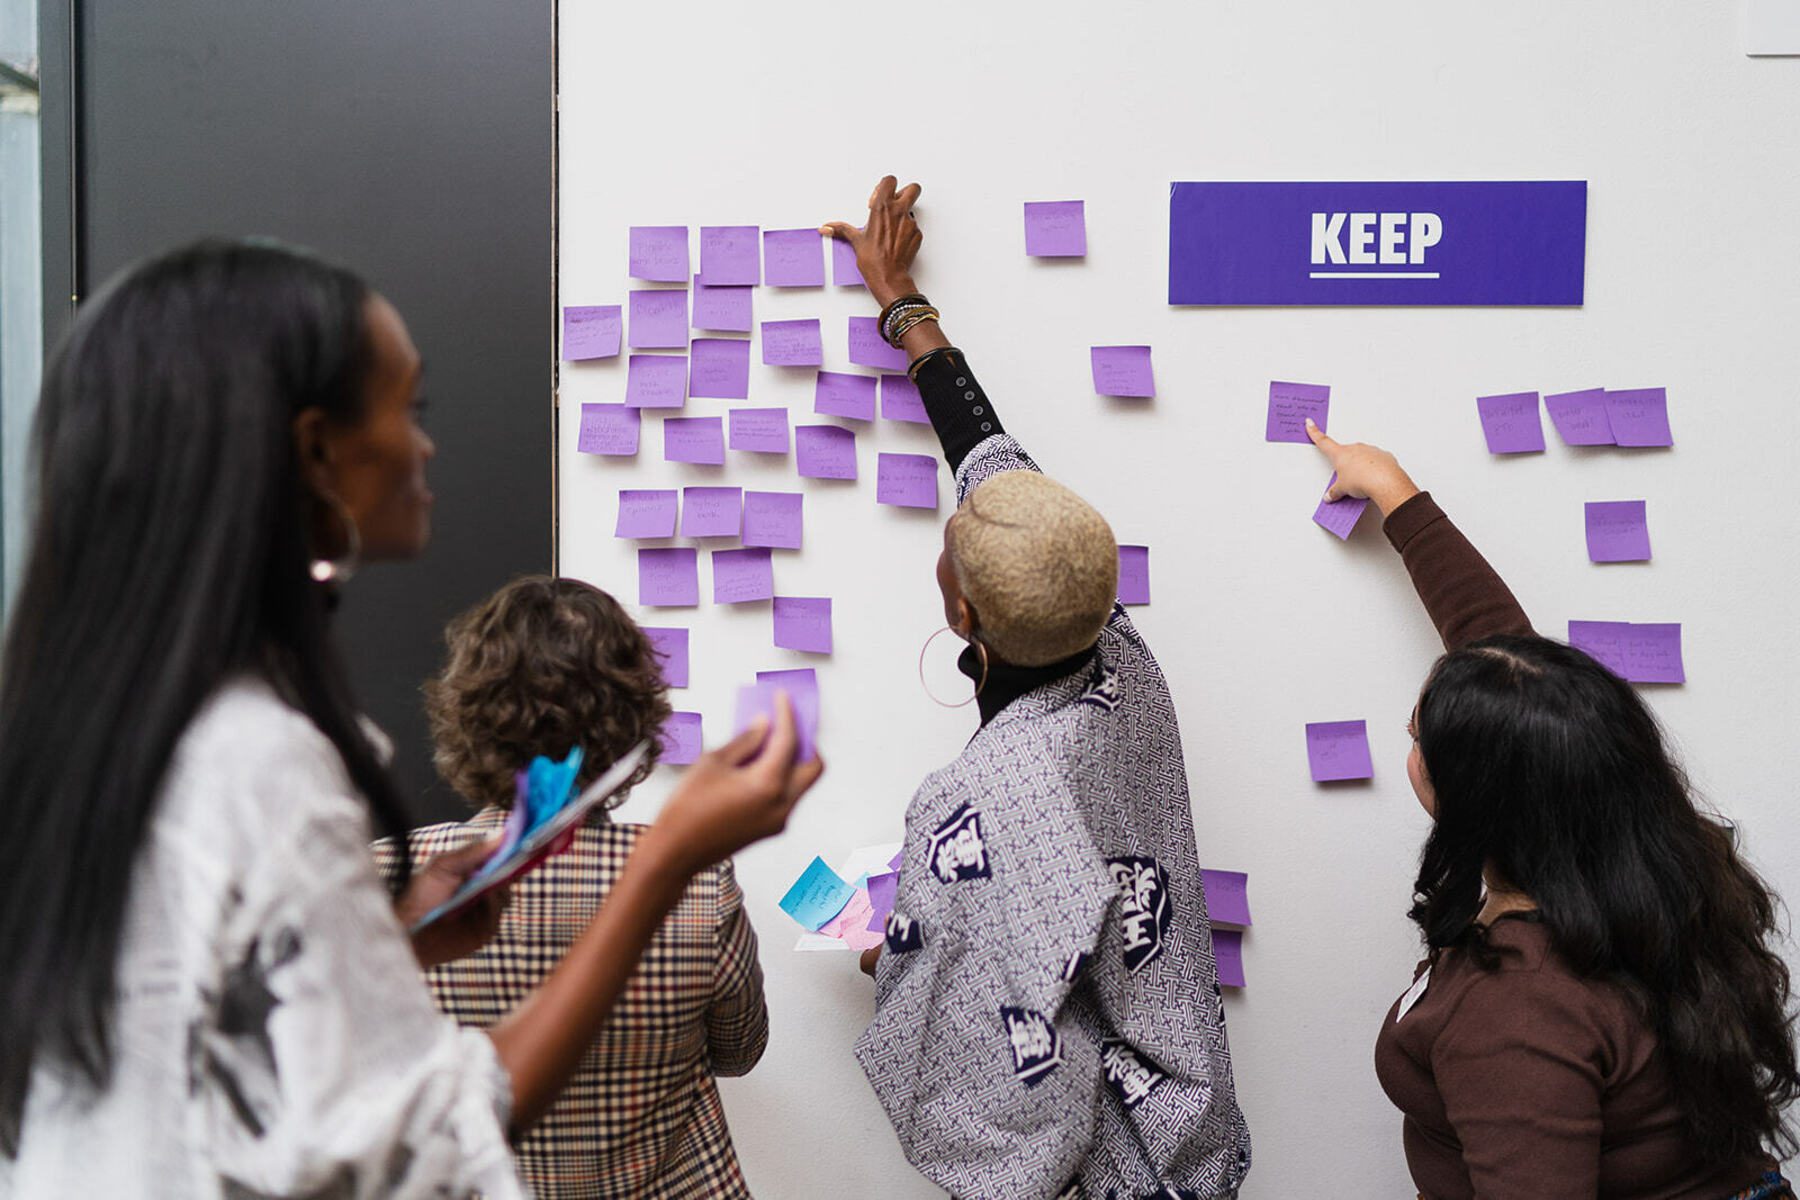 A person pastes a purple sticky note on a white wall.